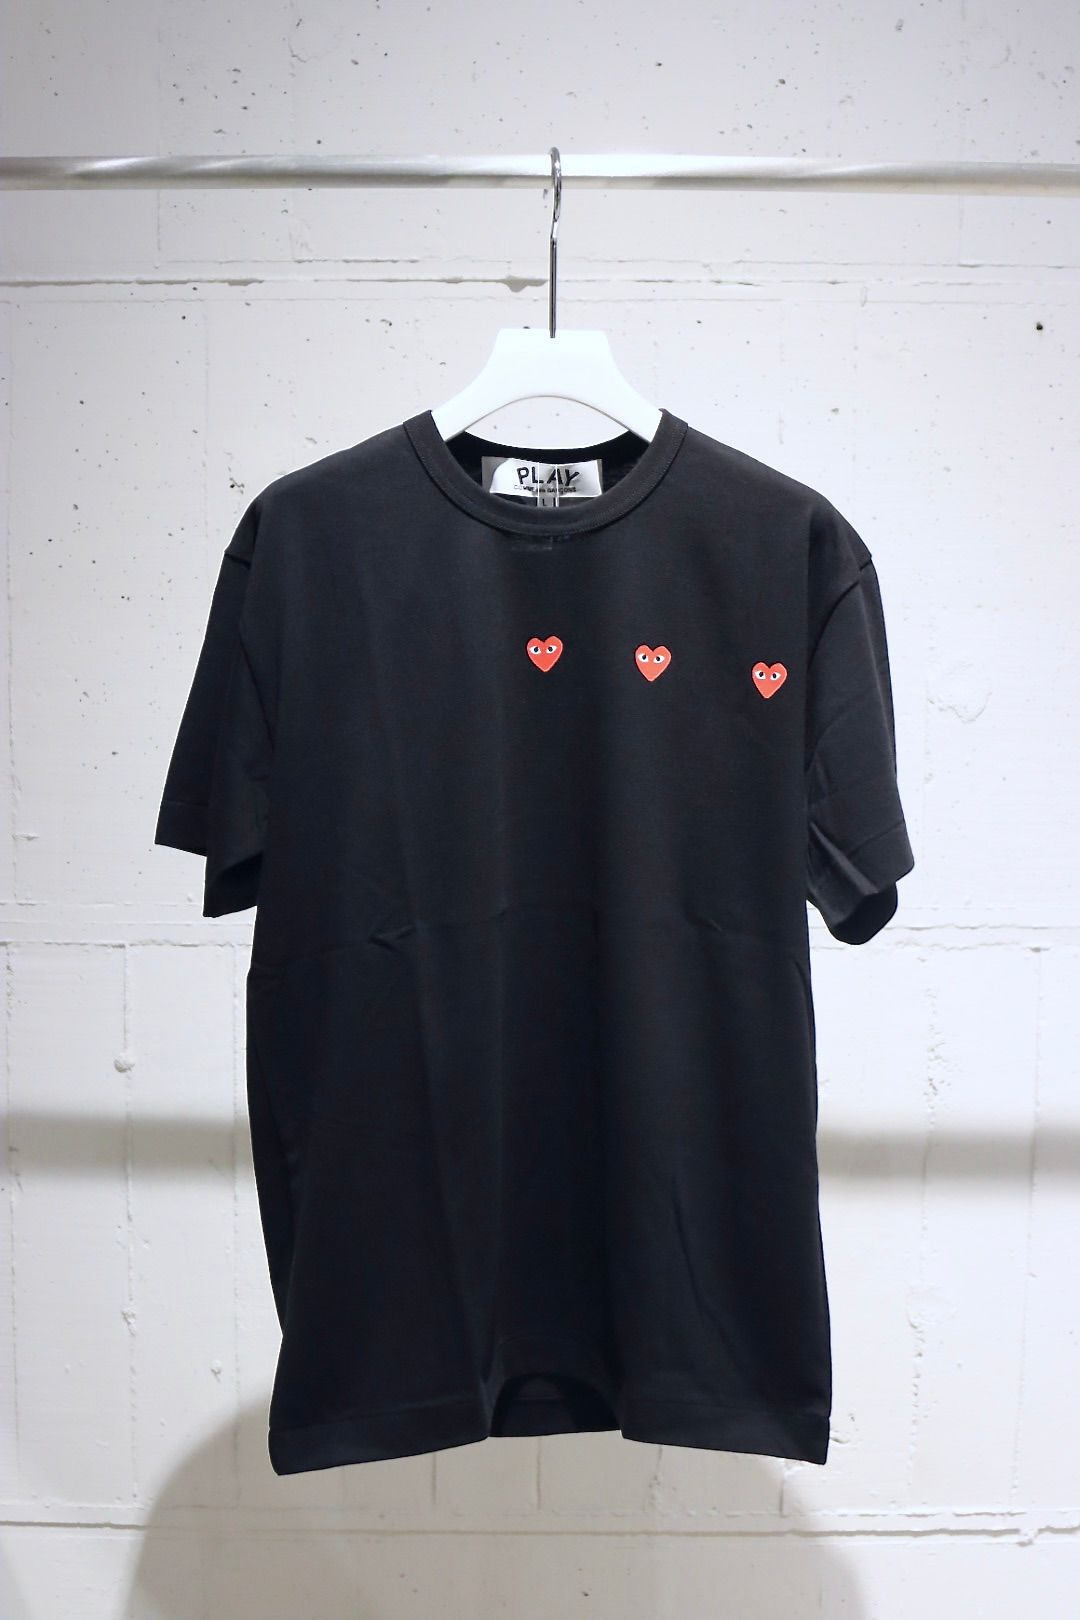 PLAY COMME des GARCONS - プレイコムデギャルソン PLAY MANY HEART S 